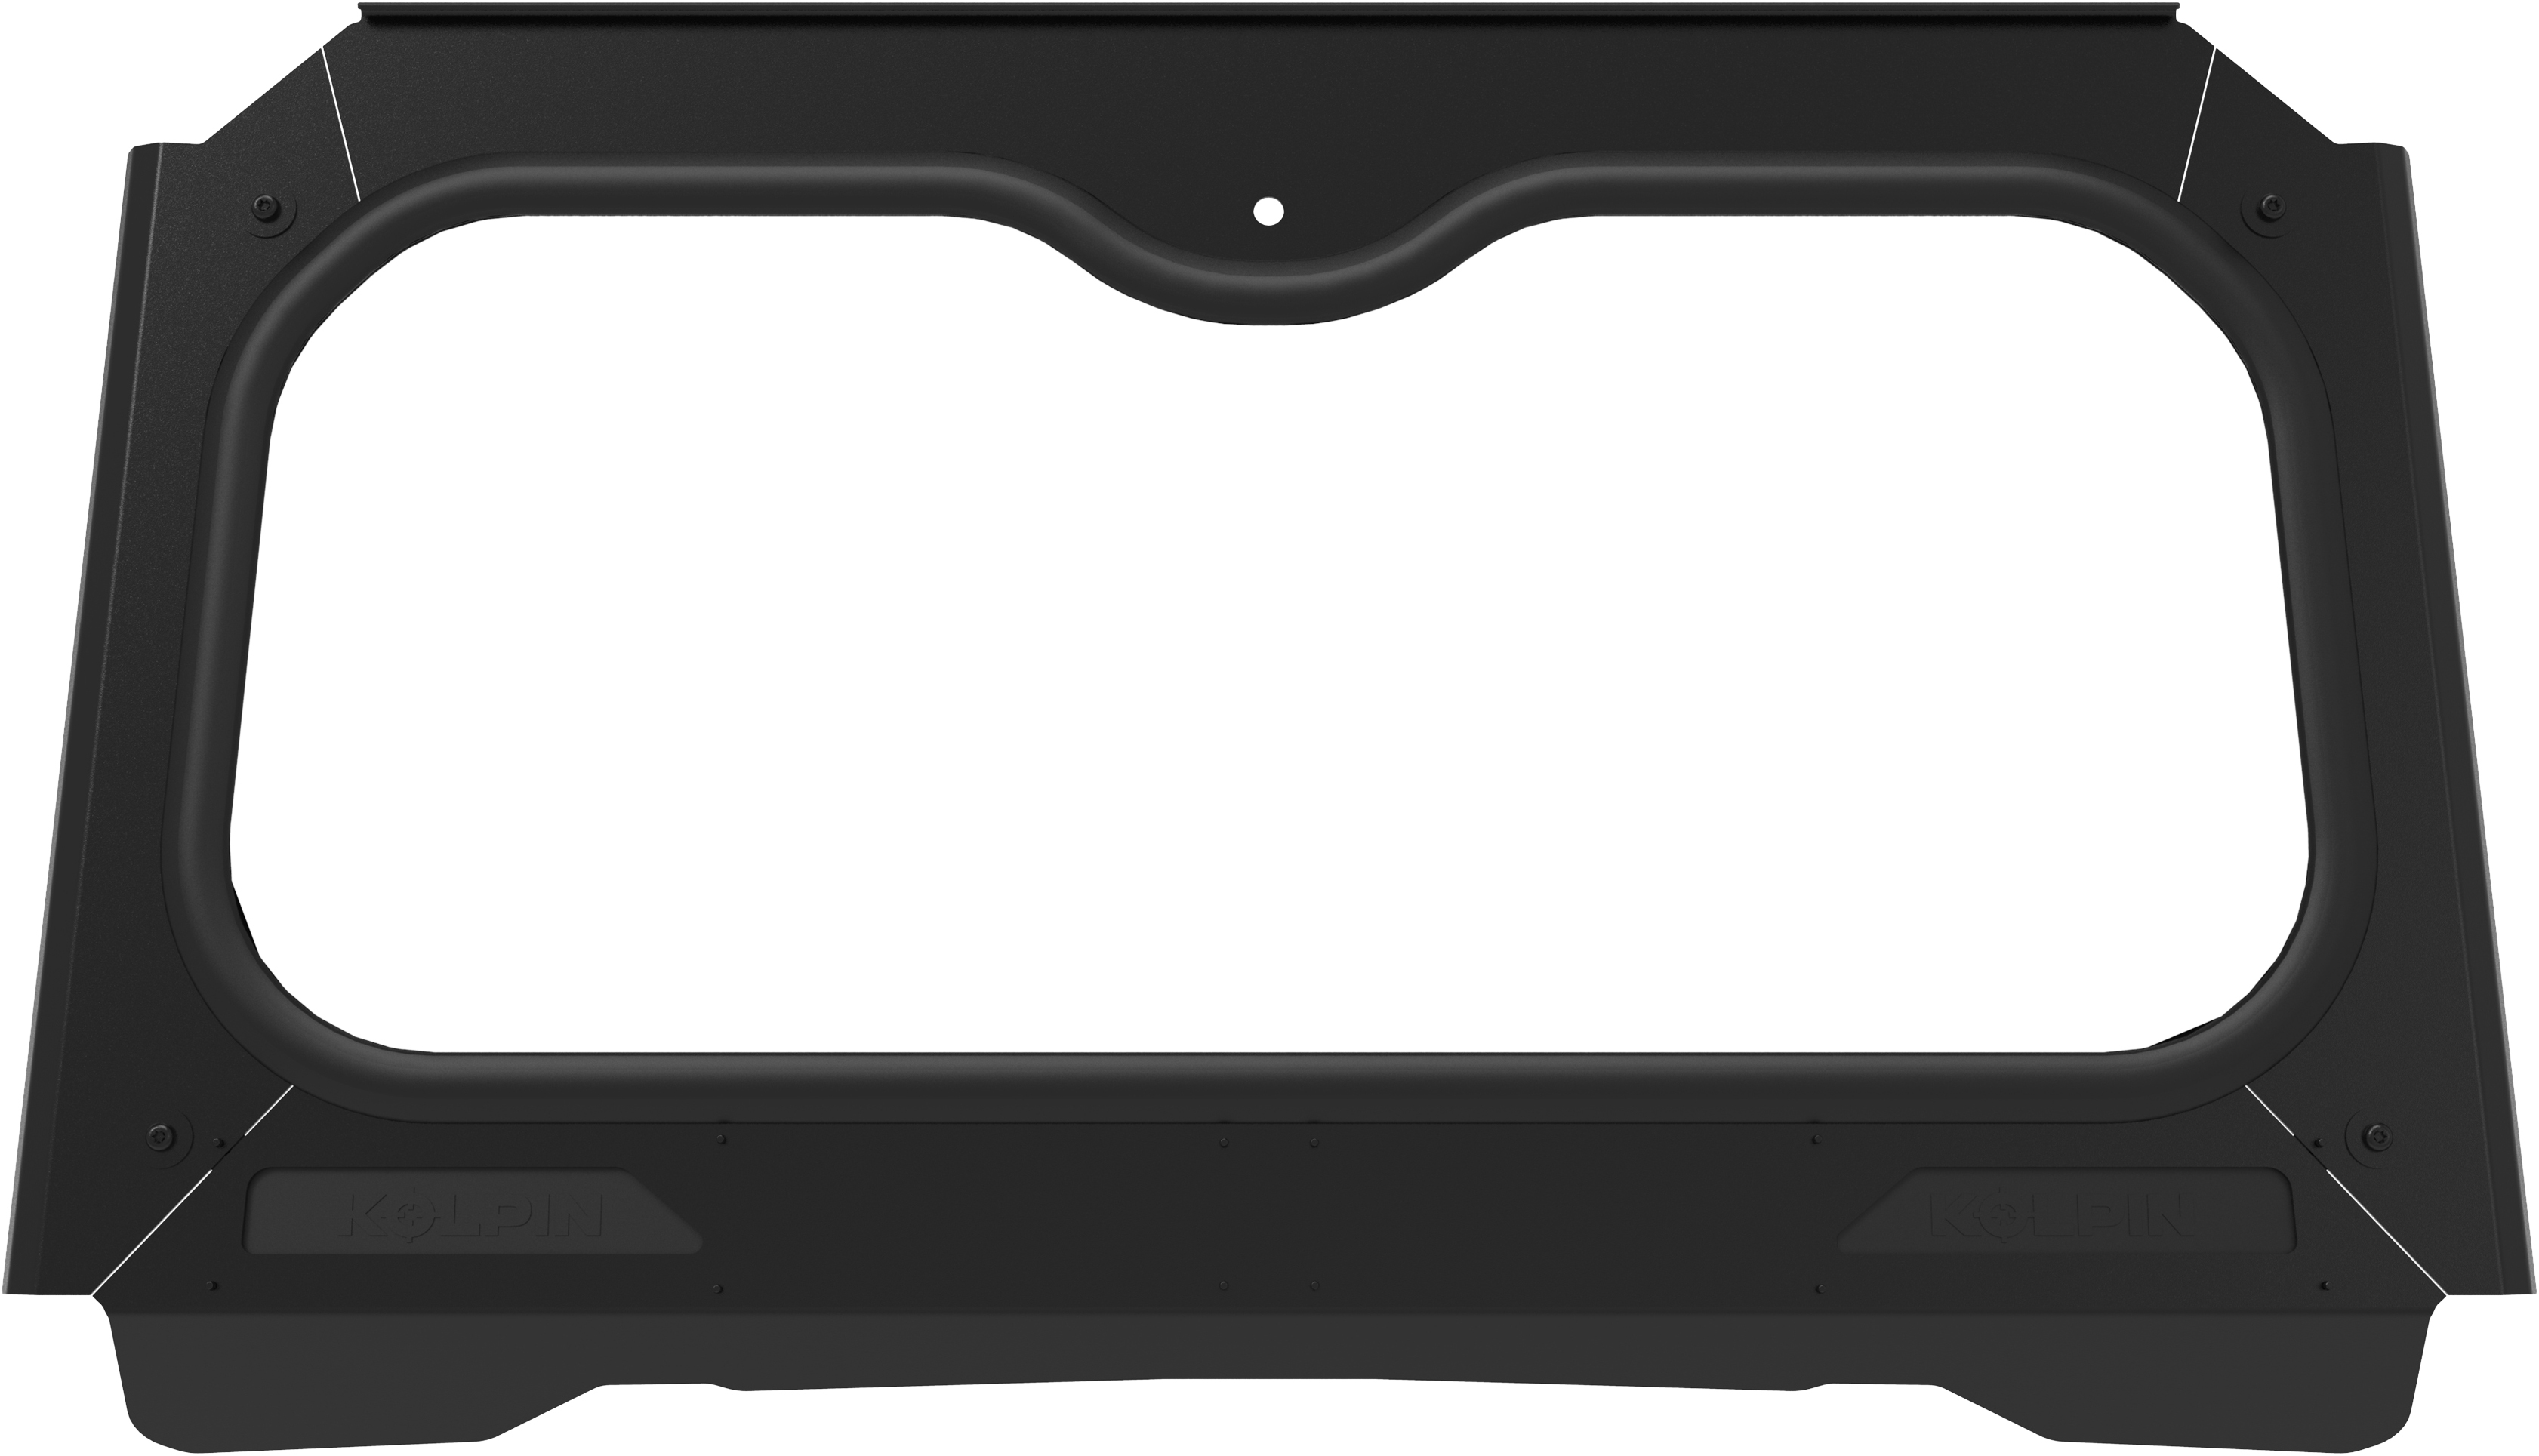 Glass Windshield w/ Metal Frame & Mounts - For 15-20 Polaris RZR 900/1000/S - Click Image to Close